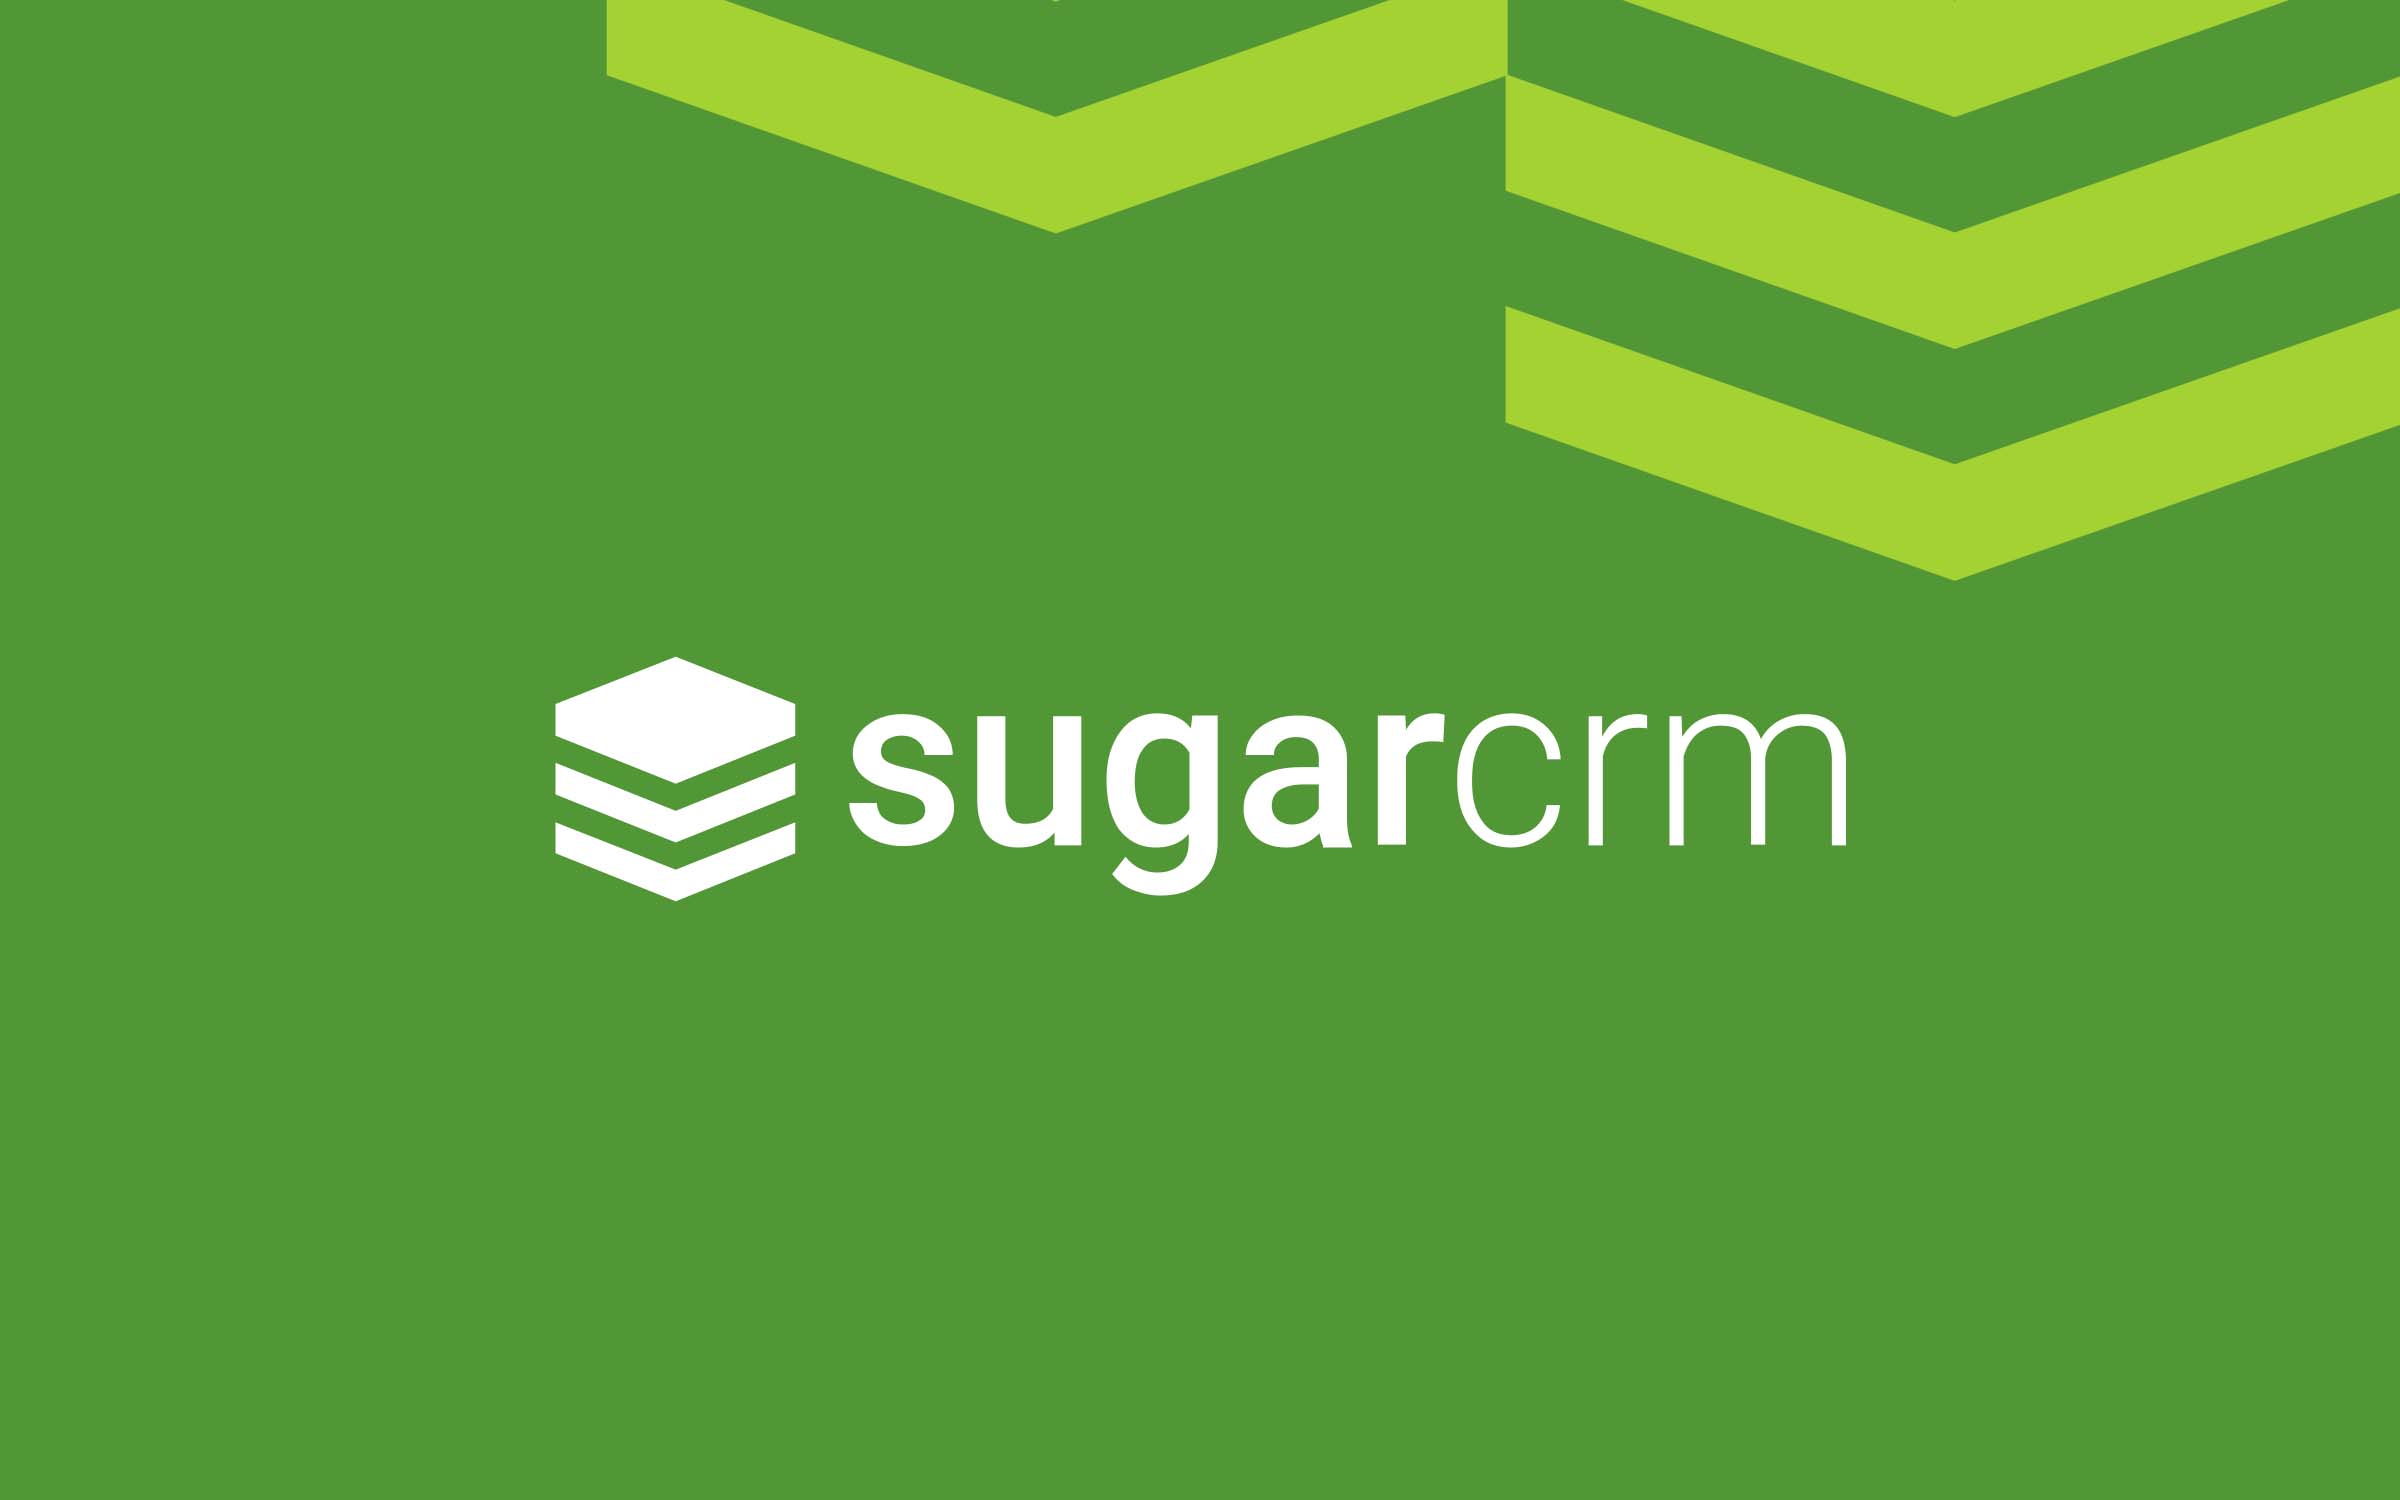 SugarCRM Named the 2022 Sales and Marketing Technology Awards “CRM Organization of the Year”